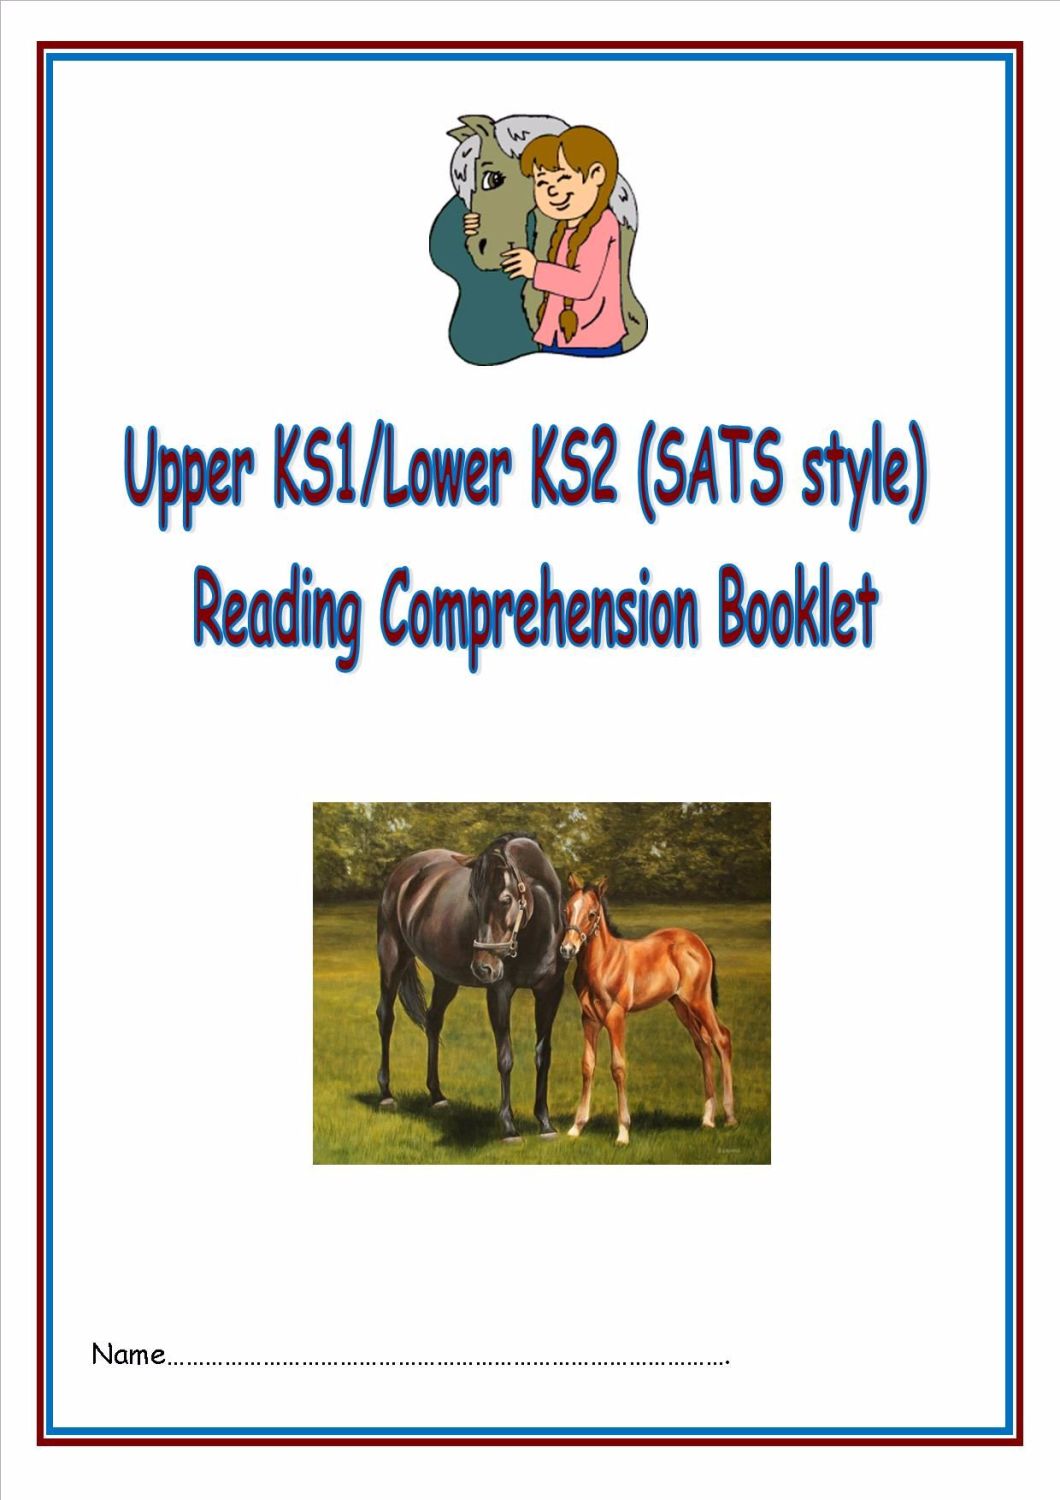 NEW! KS1/LKS2 SATs style reading comprehension booklet based on HORSES.